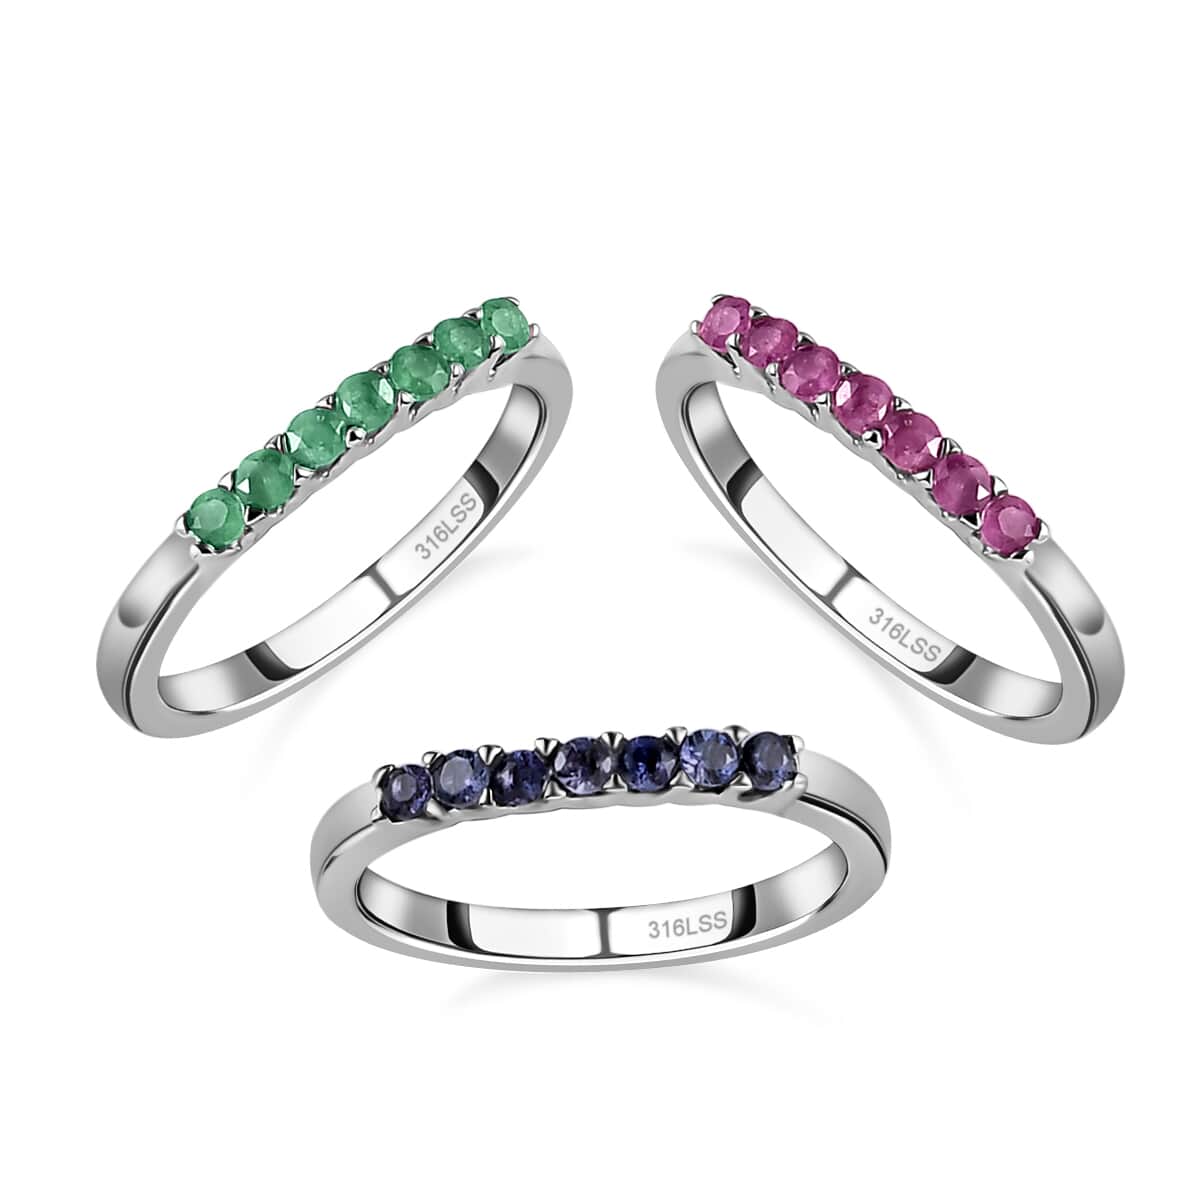 Set of 3 Rings, Niassa Ruby Ring, Tanzanite Ring, Kagem Zambian Emerald Ring, Set of 3 Rings in Stainless Steel, 7 Stone Wedding Band Rings For Women, Gifts For Her 1.00 ctw image number 0